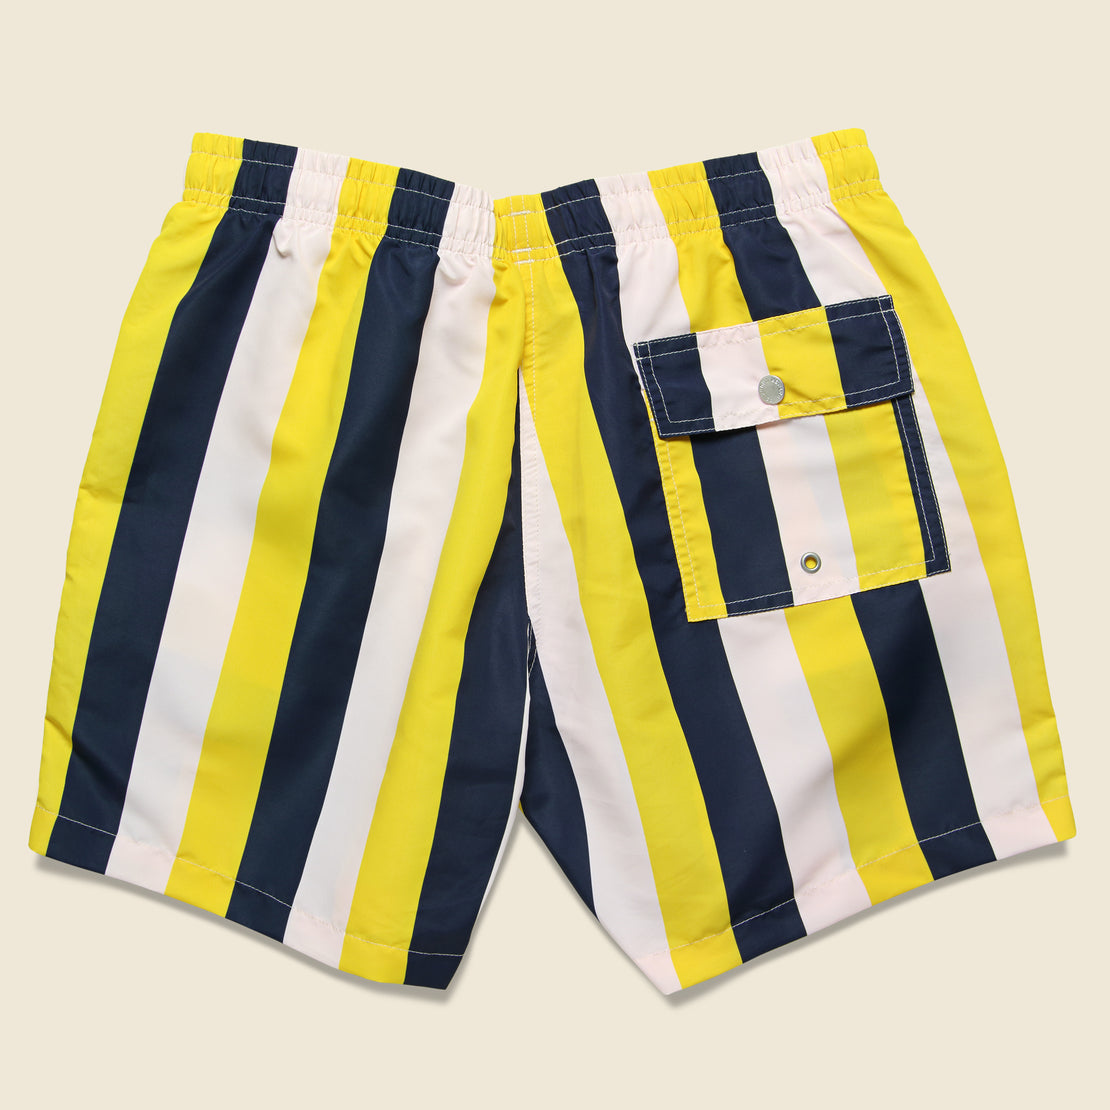 Striped Swim Trunk - Pink/Yellow - Bather Trunk Co. - STAG Provisions - Shorts - Swim